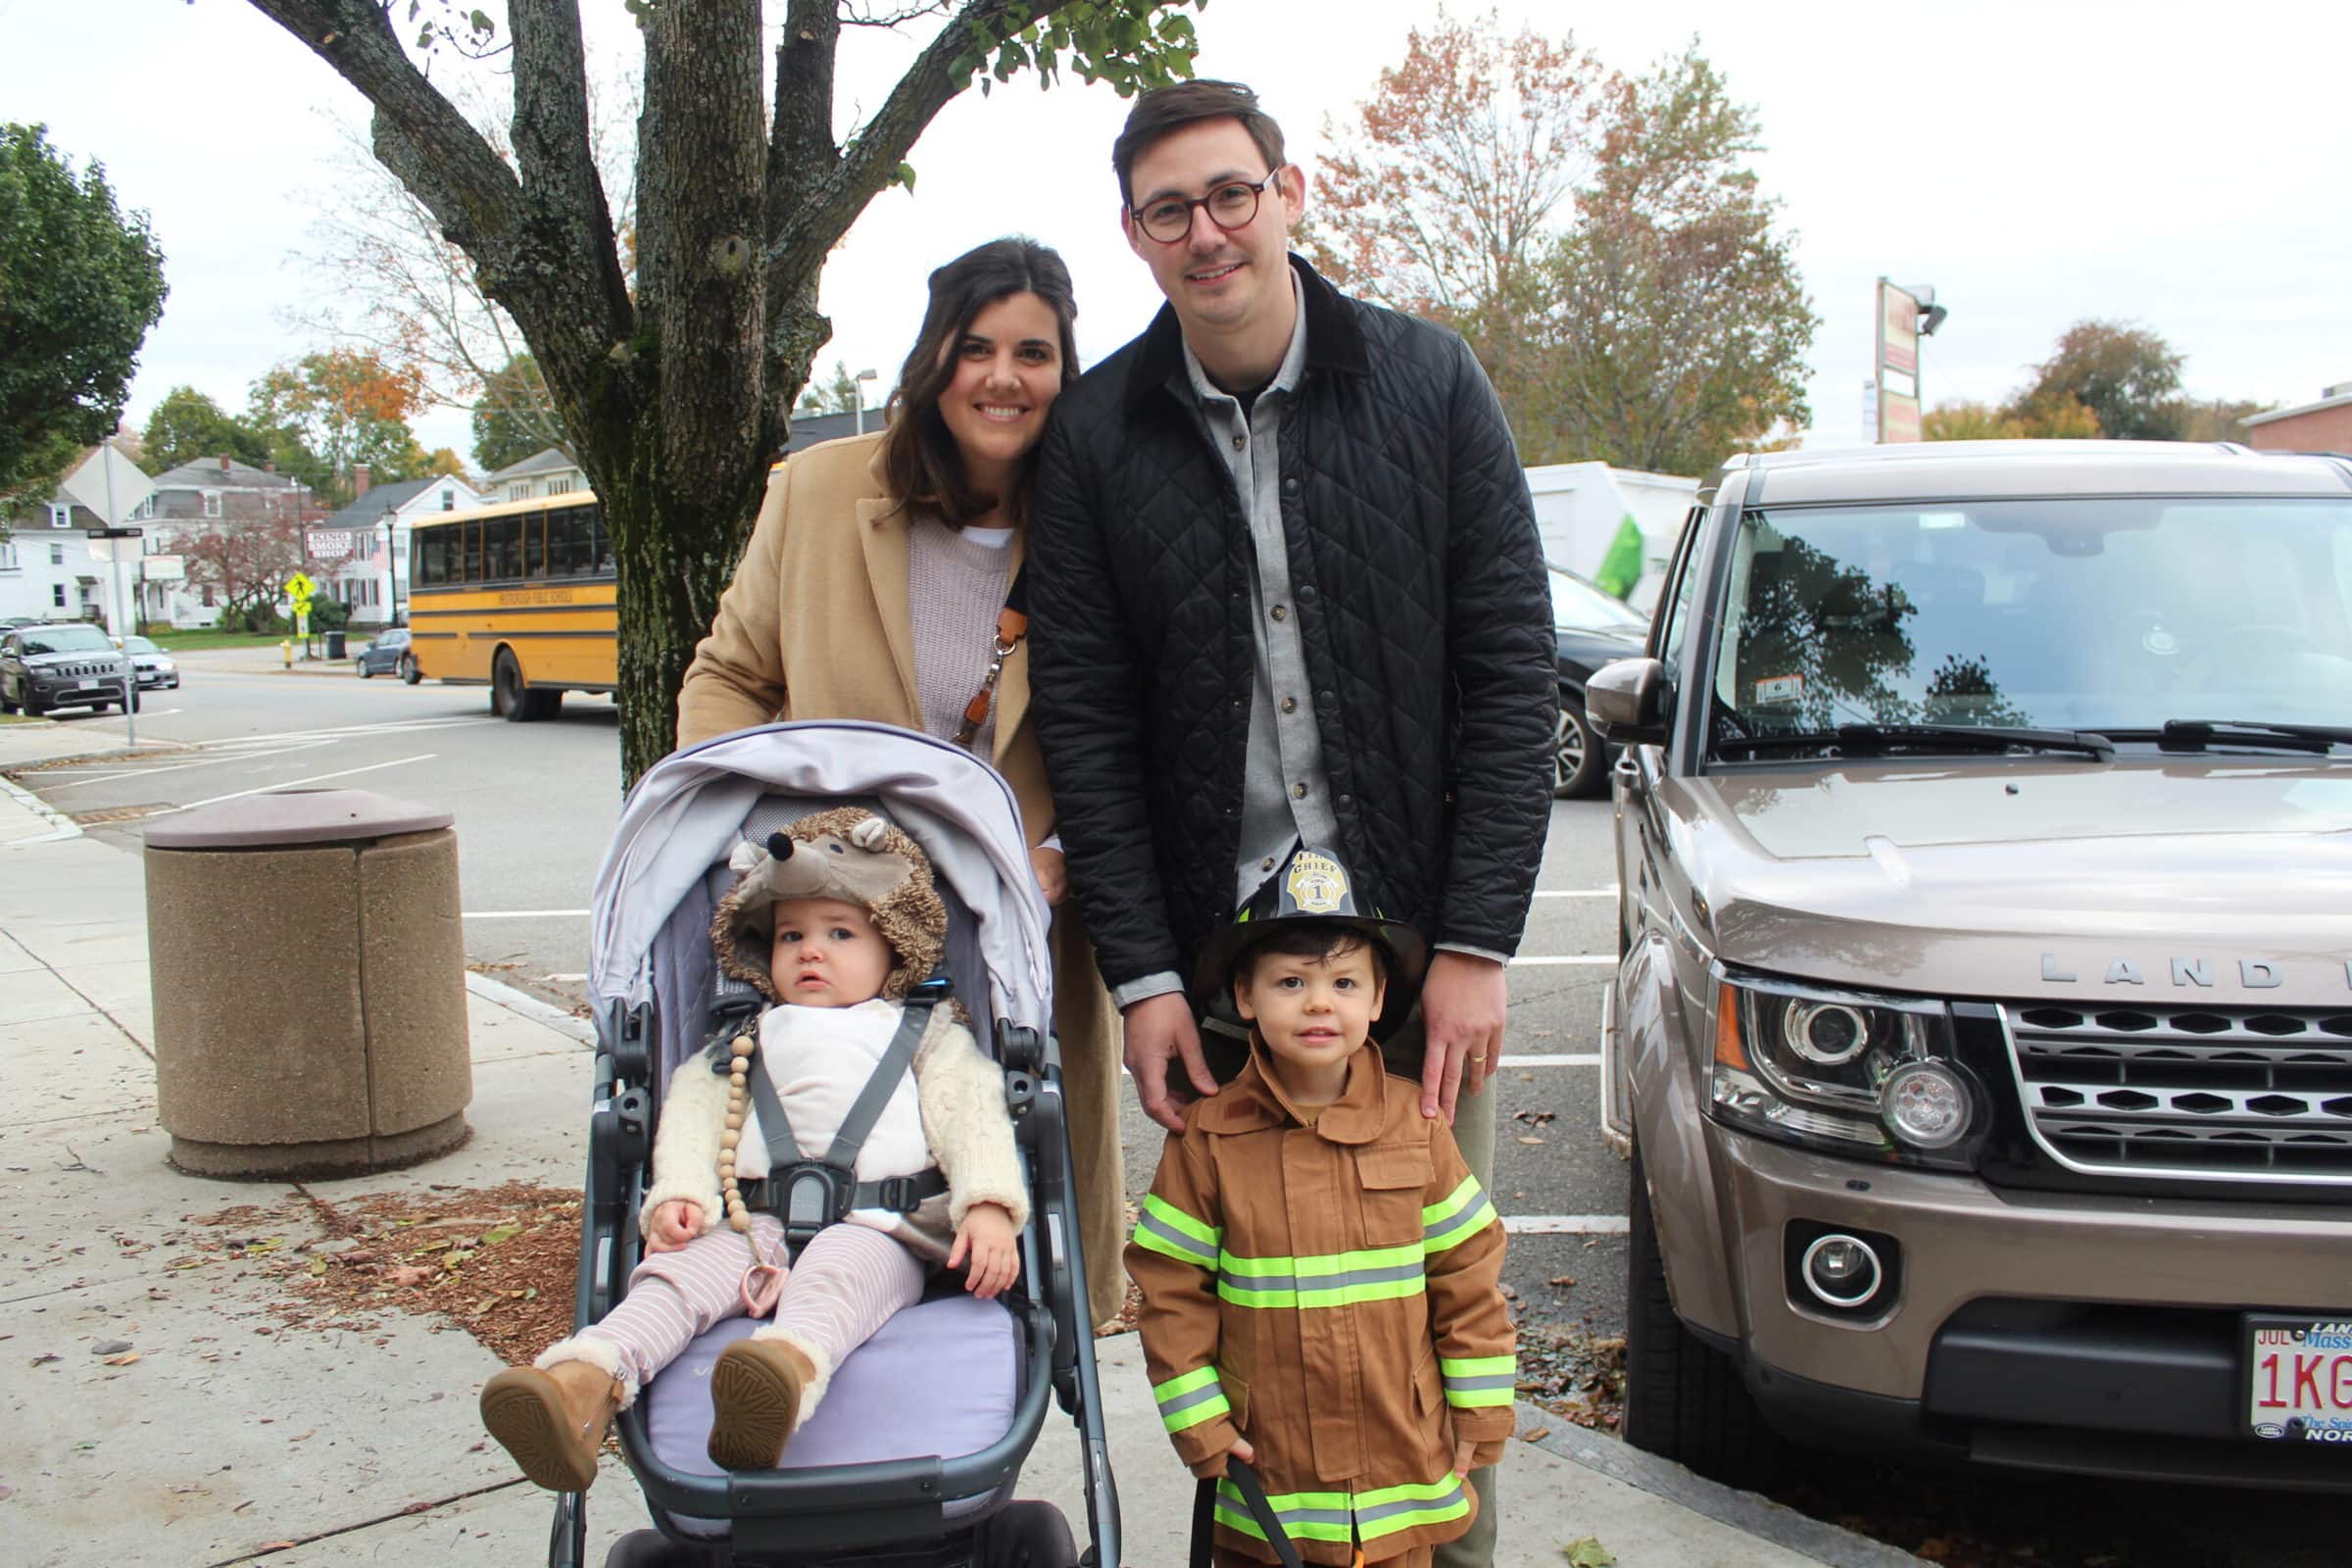 Halloween comes early in downtown Westborough